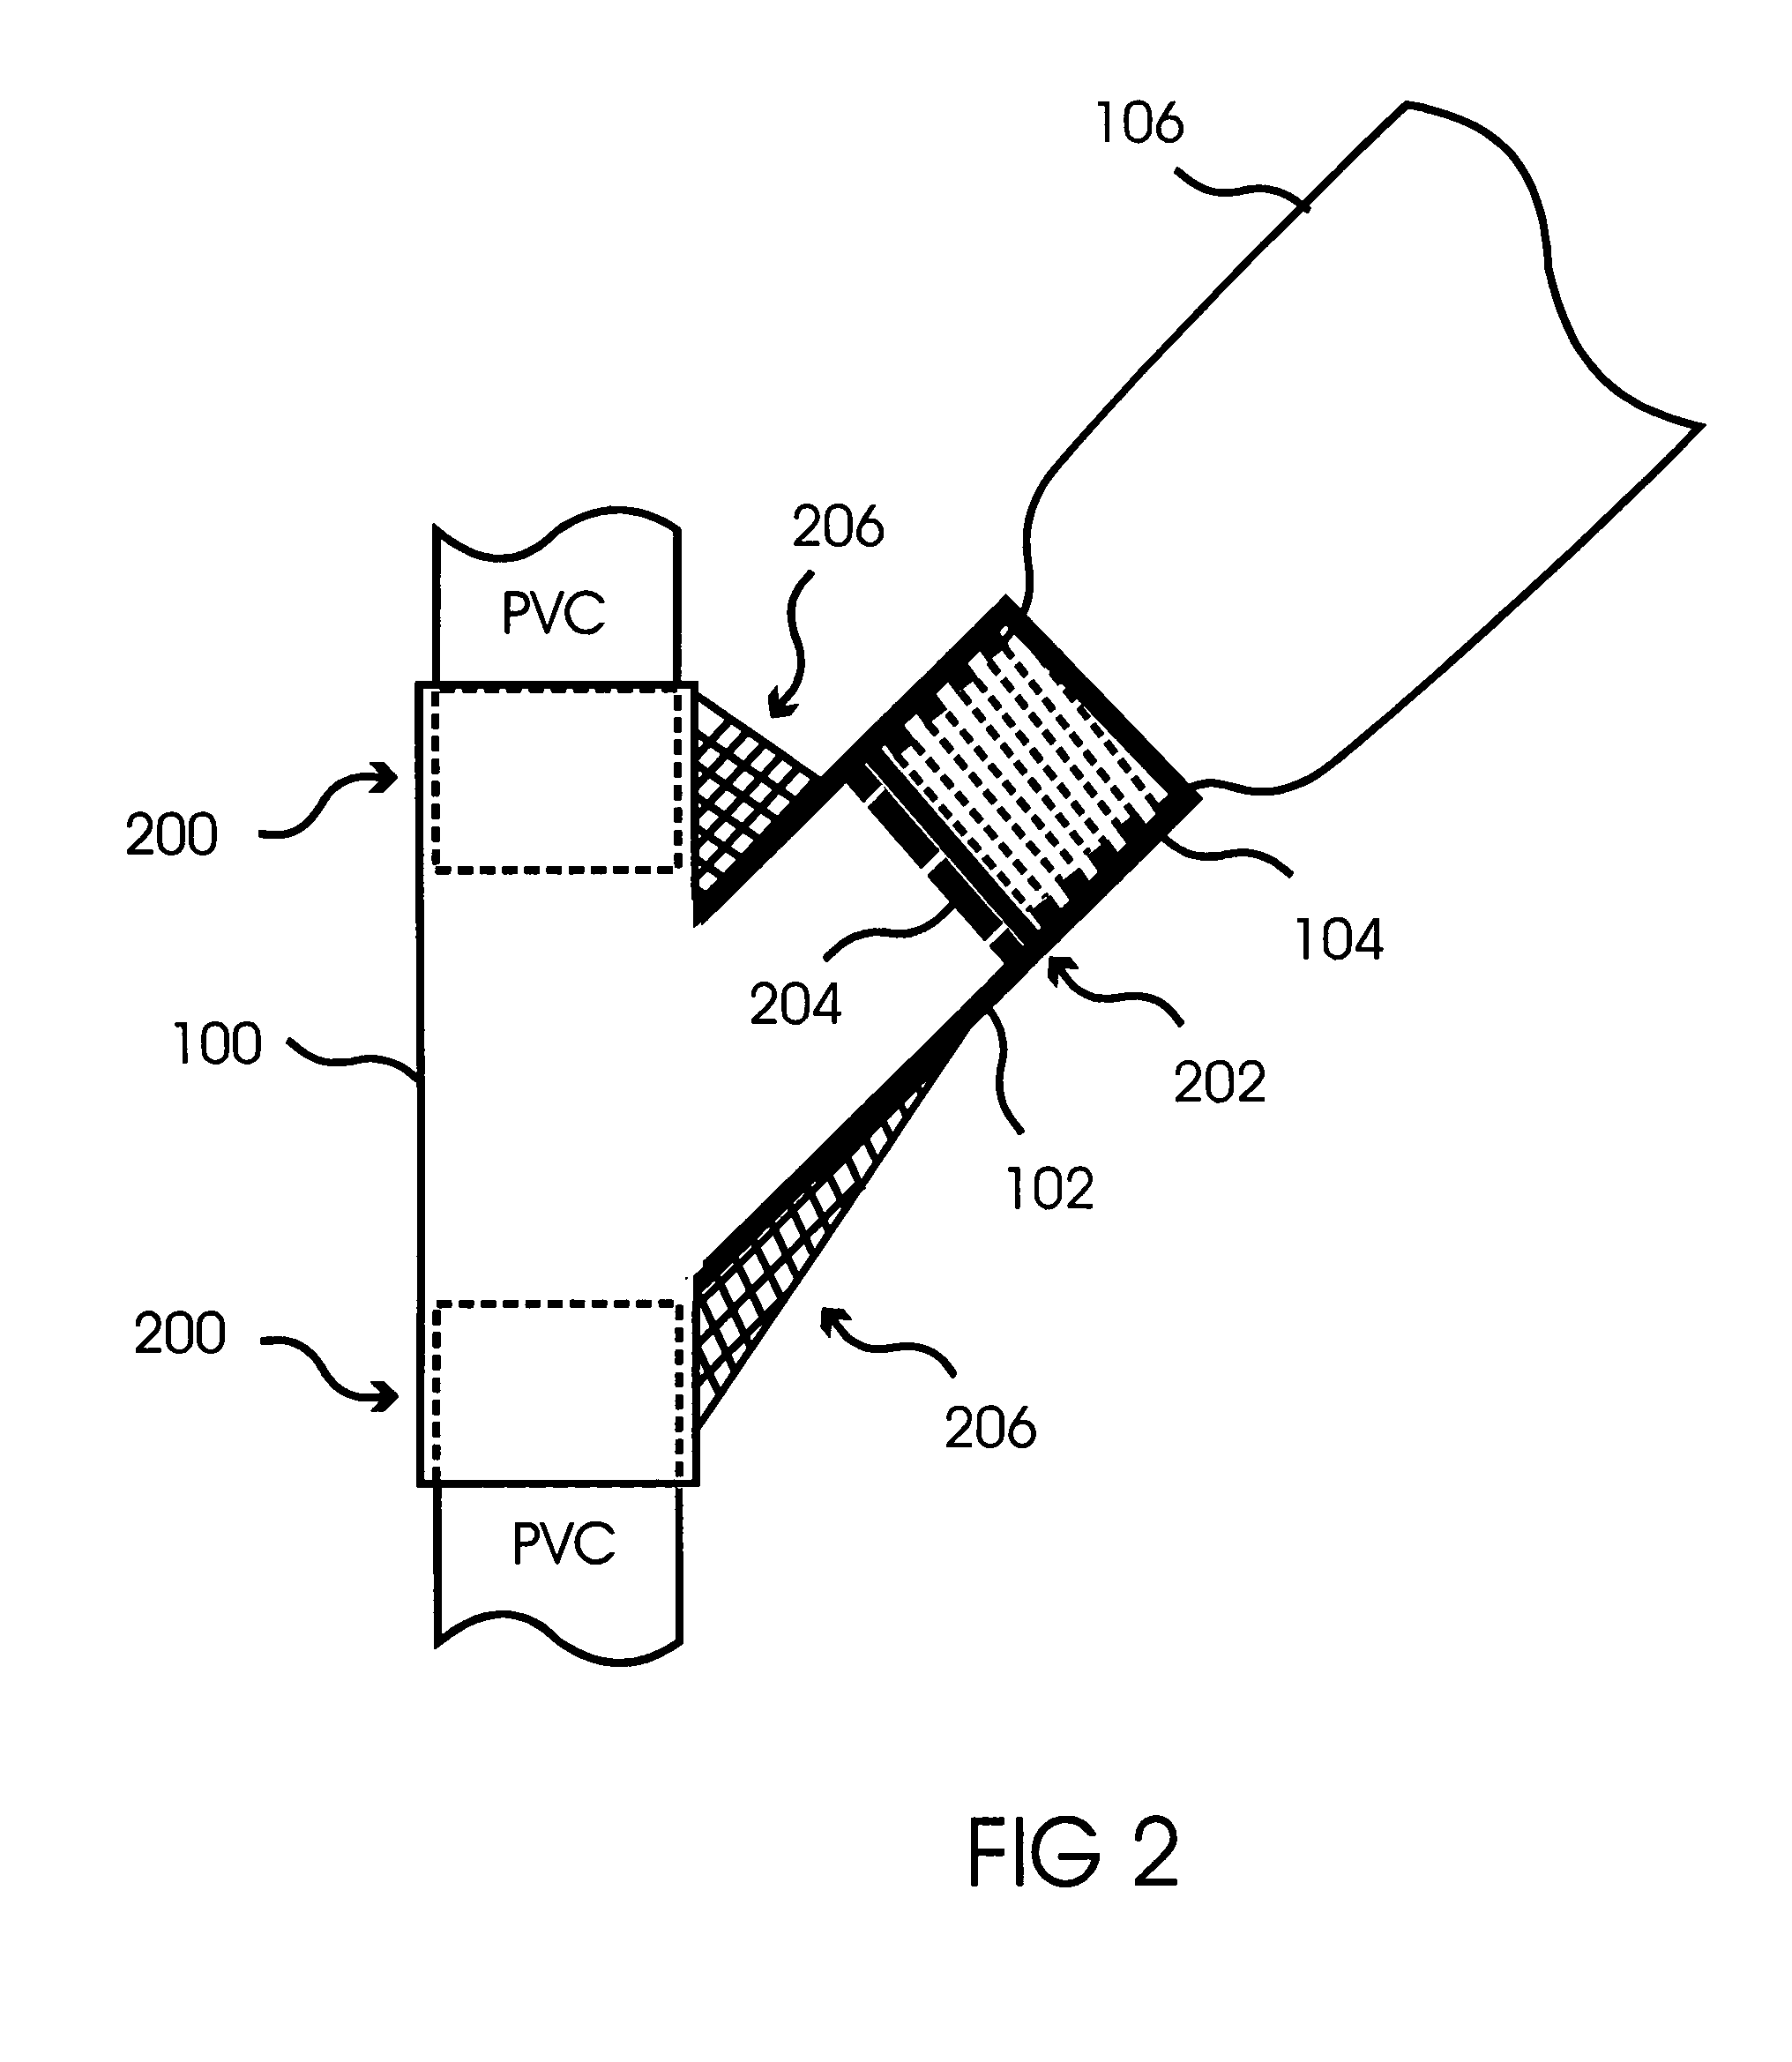 Liquid fertilizer, weed killer, and pesticide application device using exchangeable containers connected to an irrigation system